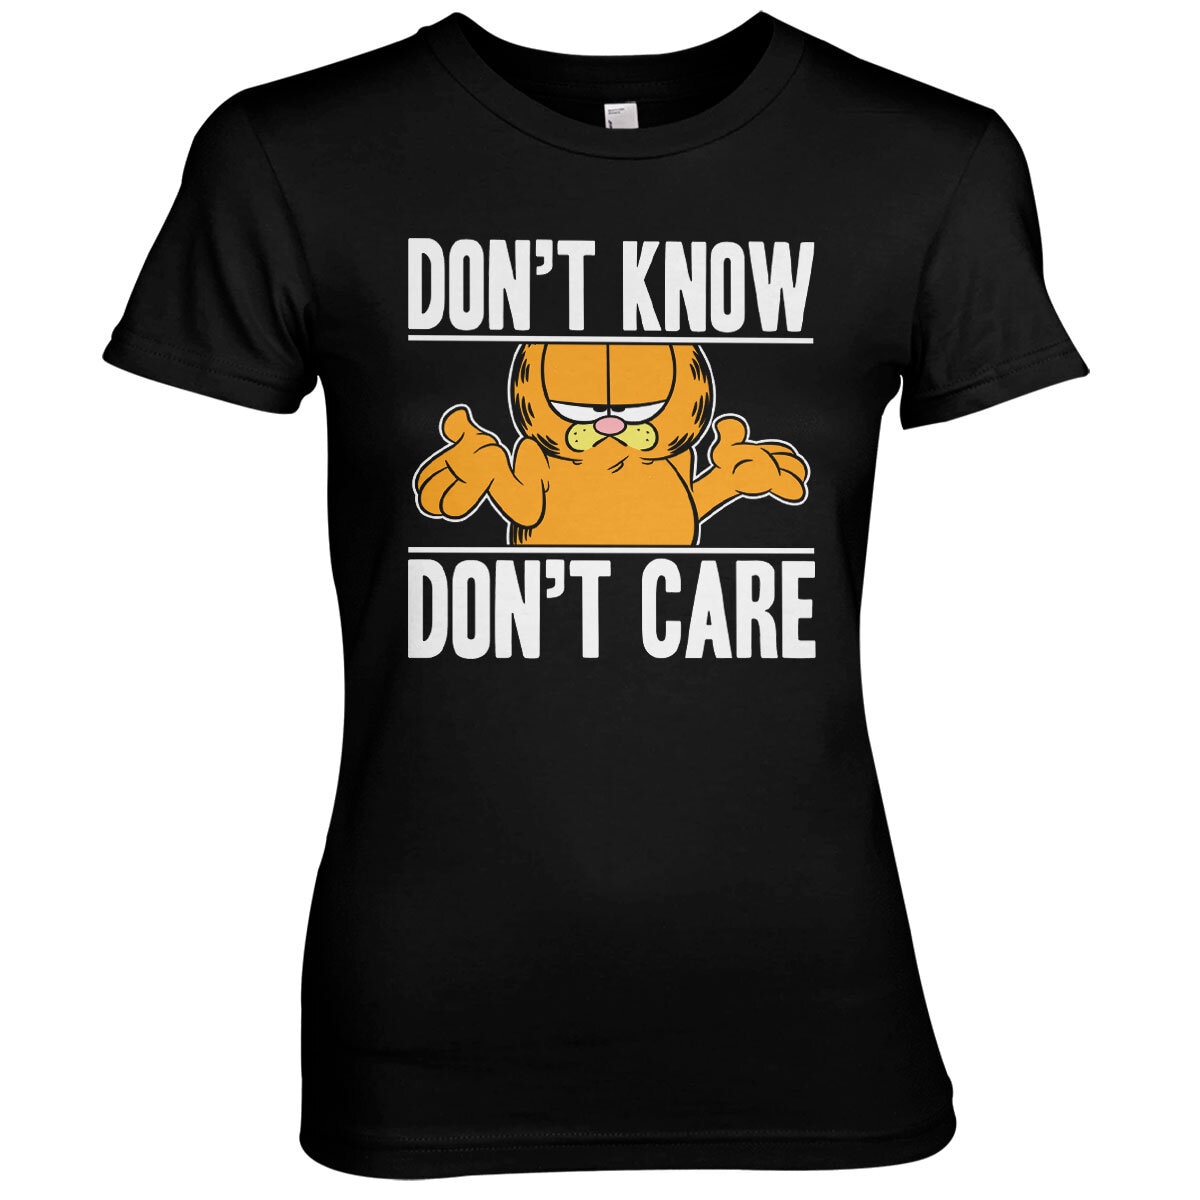 Garfield Don't Know - Don't Care Girly Tee